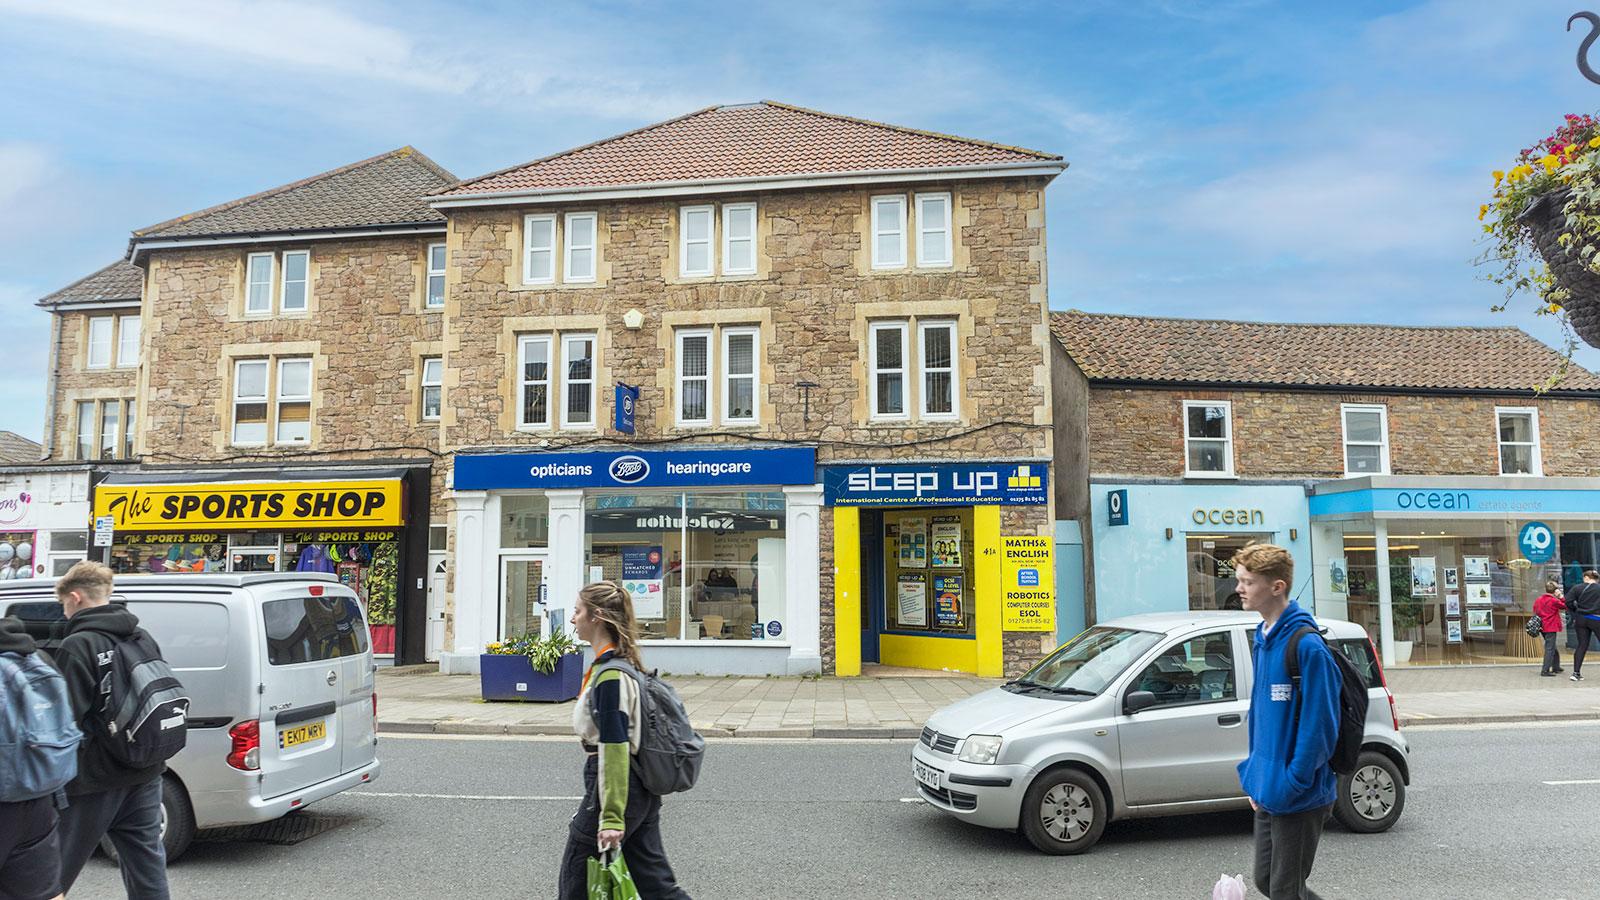 41 and 41A High Street<br>Portishead<br>Bristol<br>Somerset<br>BS20 6AA